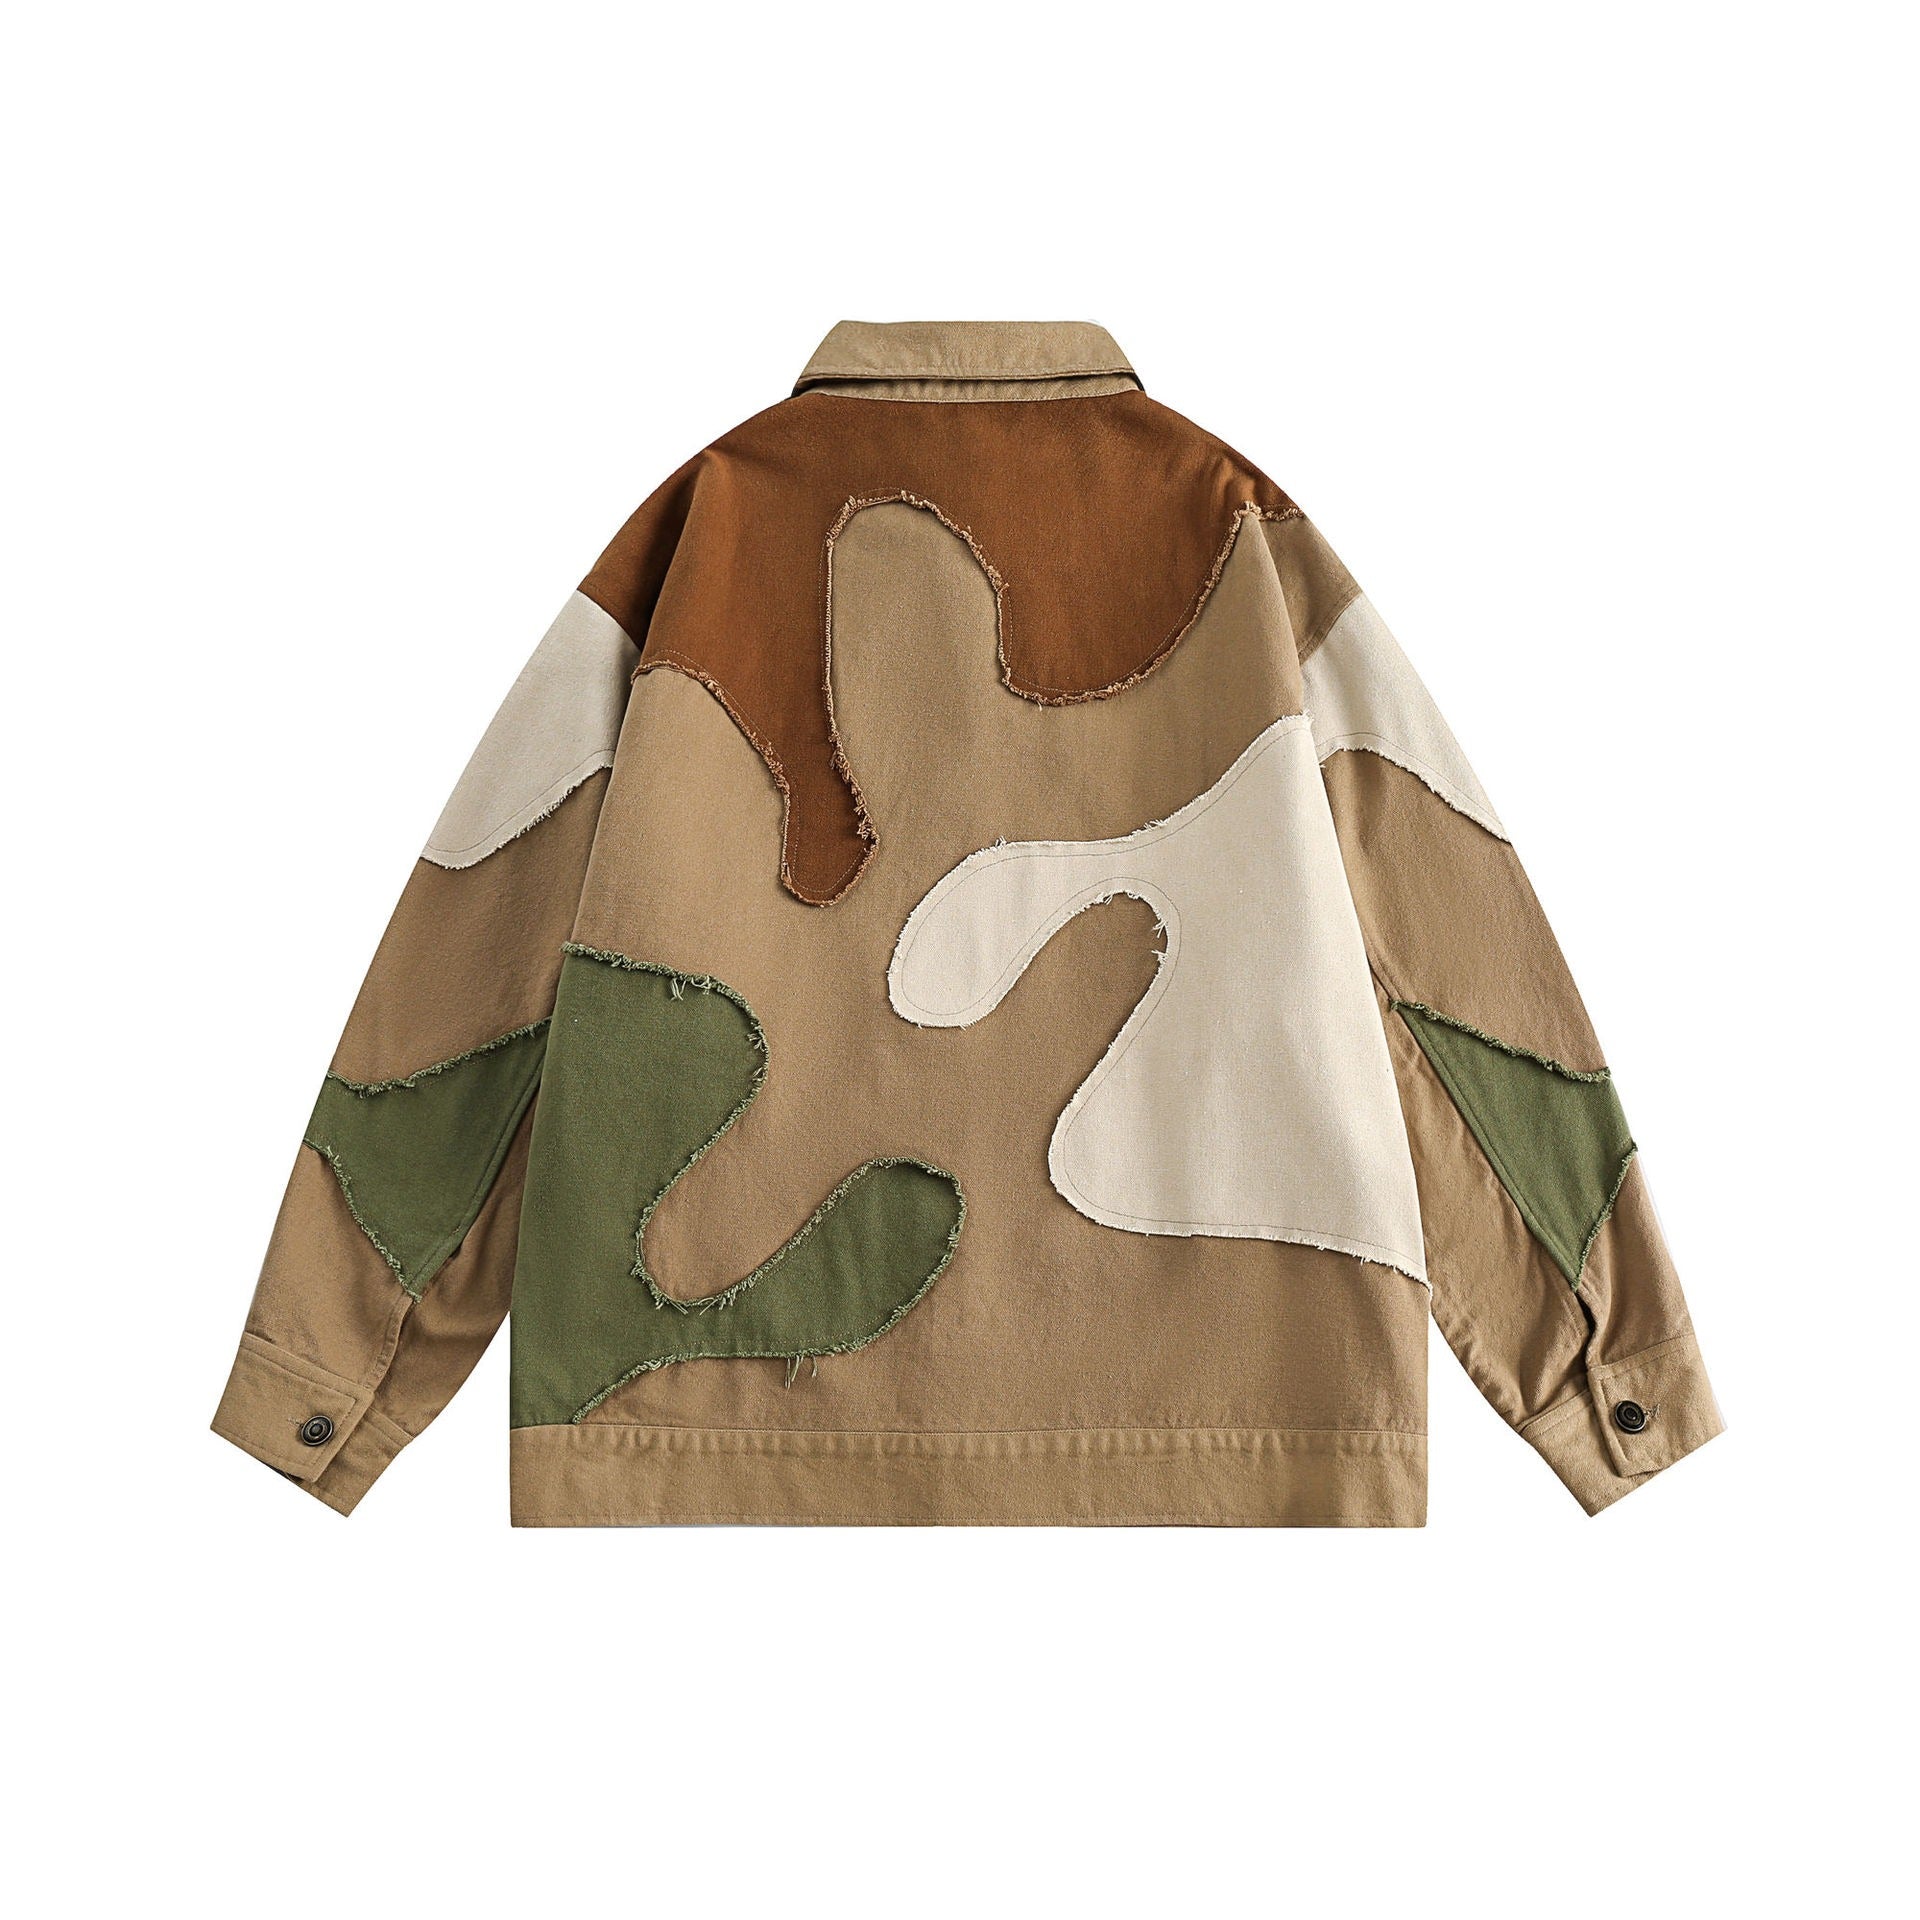 Splicing Retro Spring and Autumn Jacket Loose Camouflage Jacket for Women